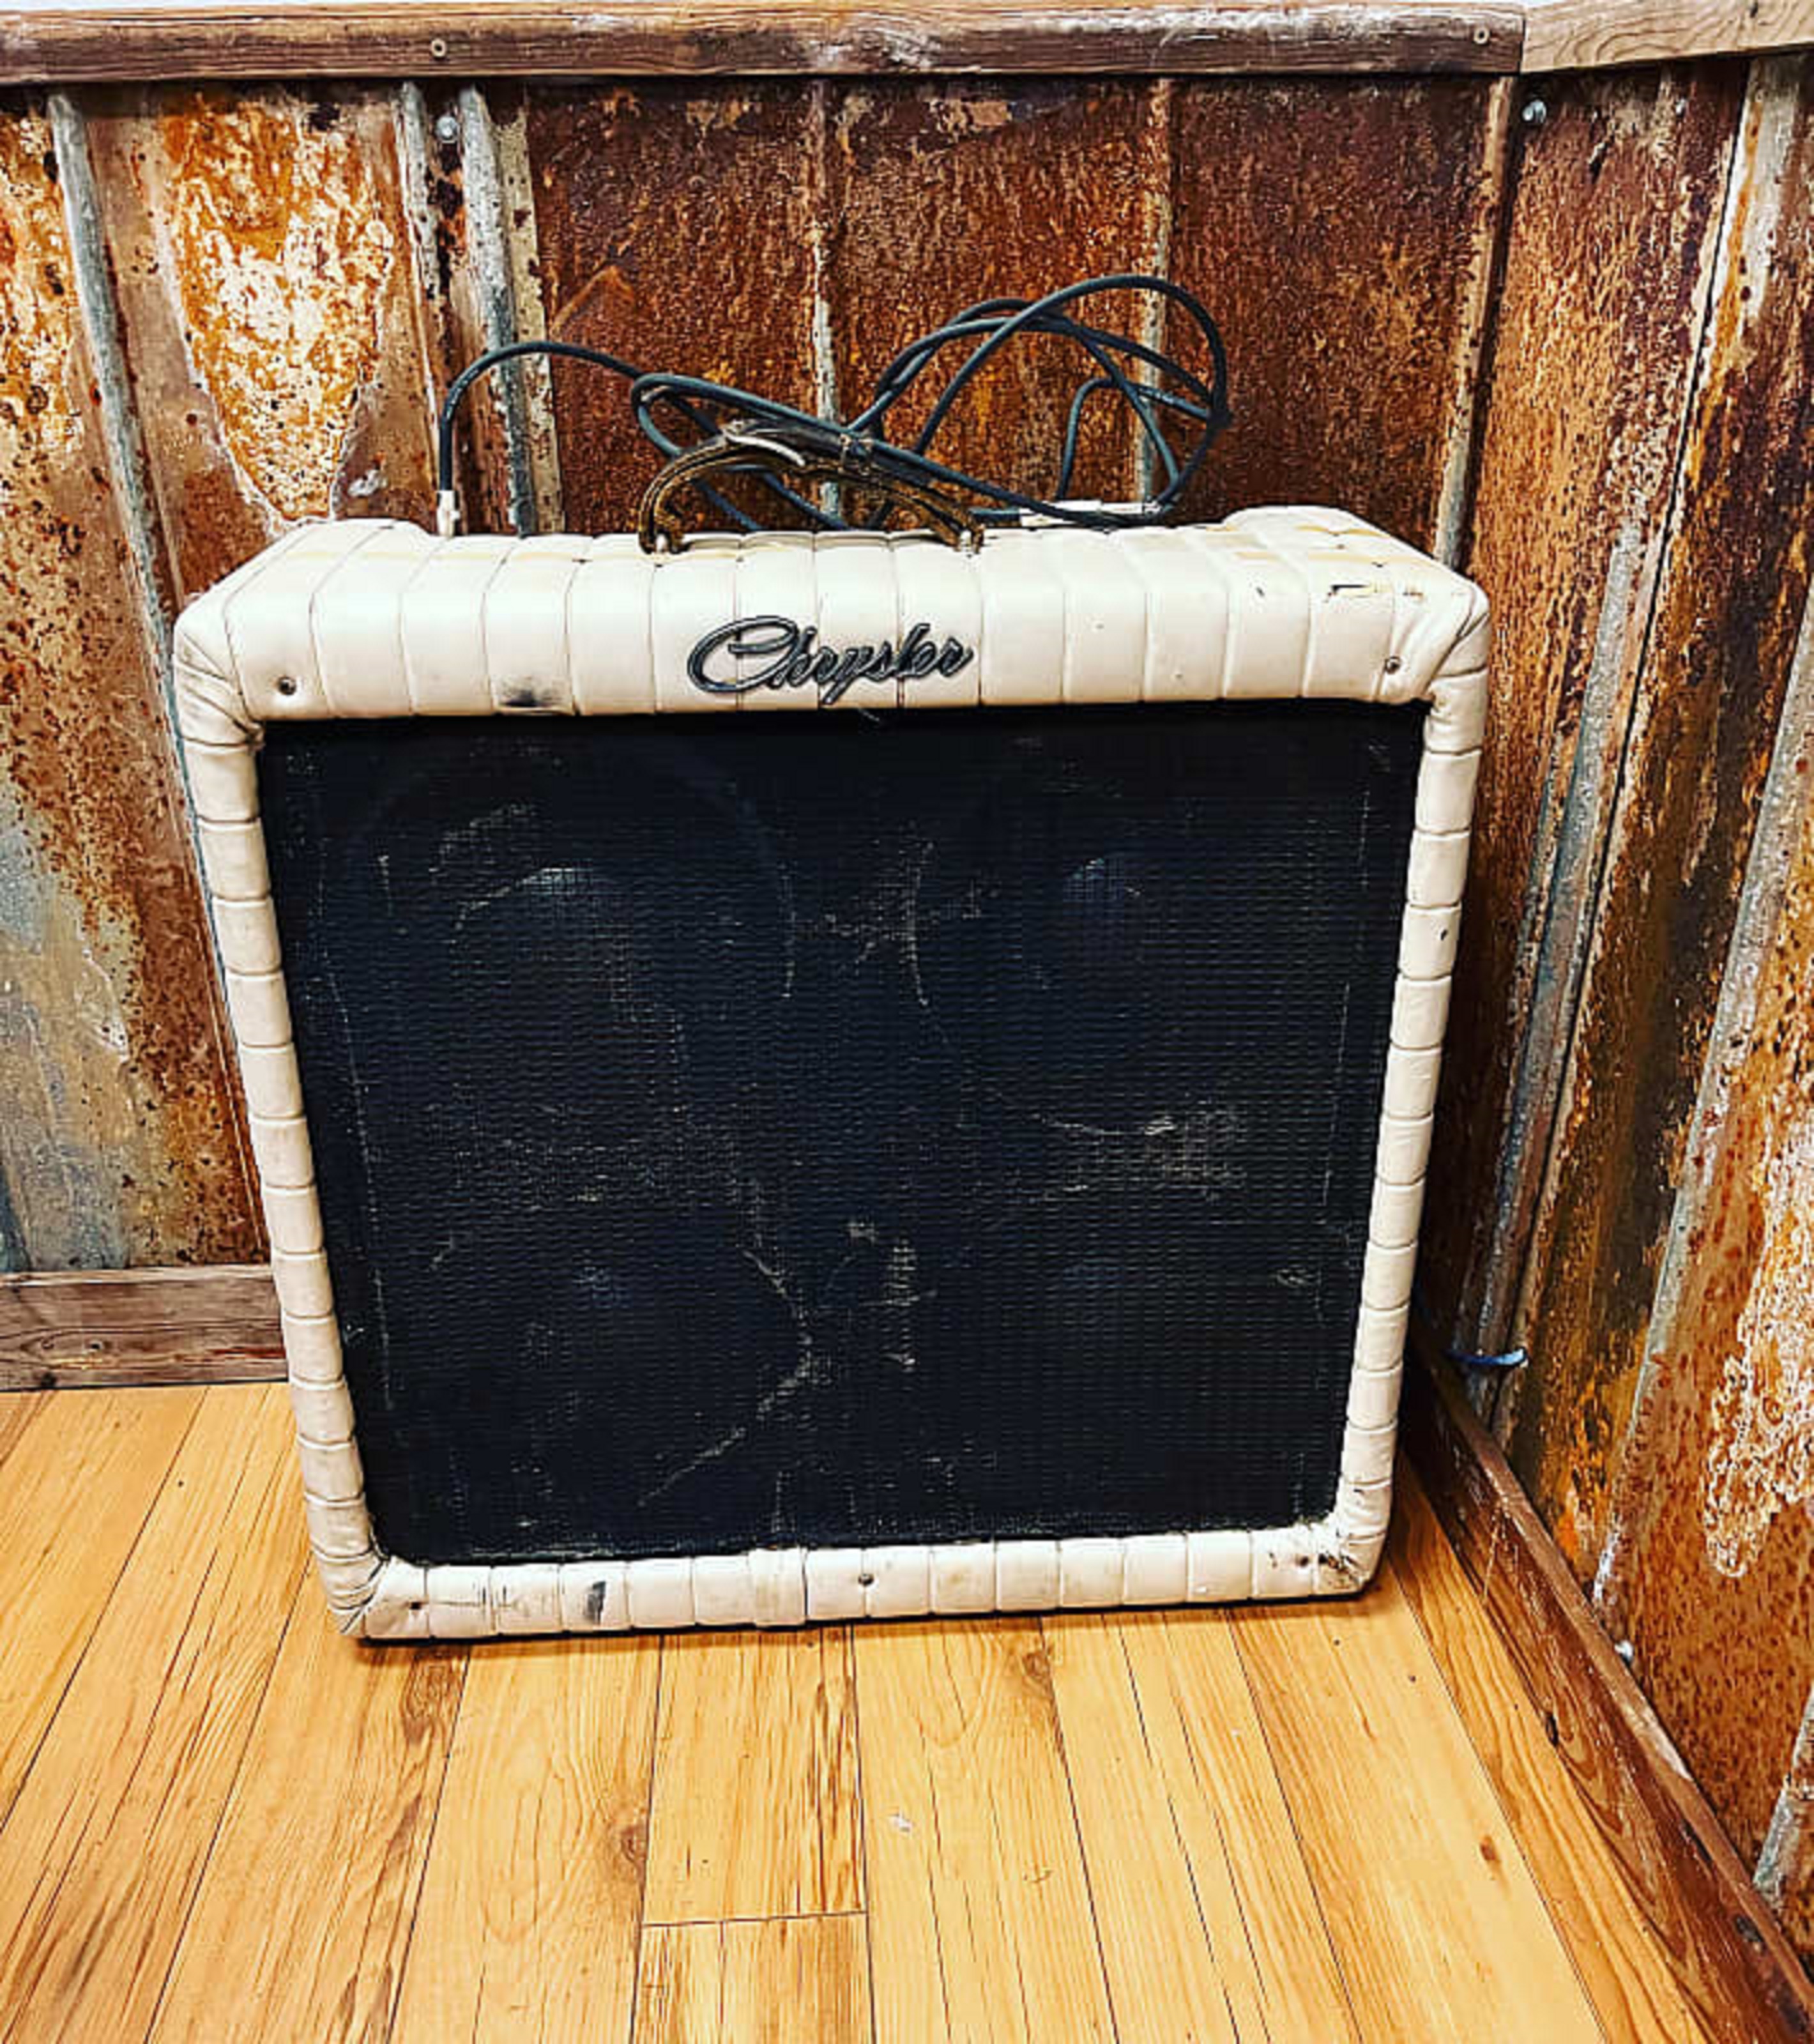 Find of the Week: The Grateful Dead's Customized Fender Bassman